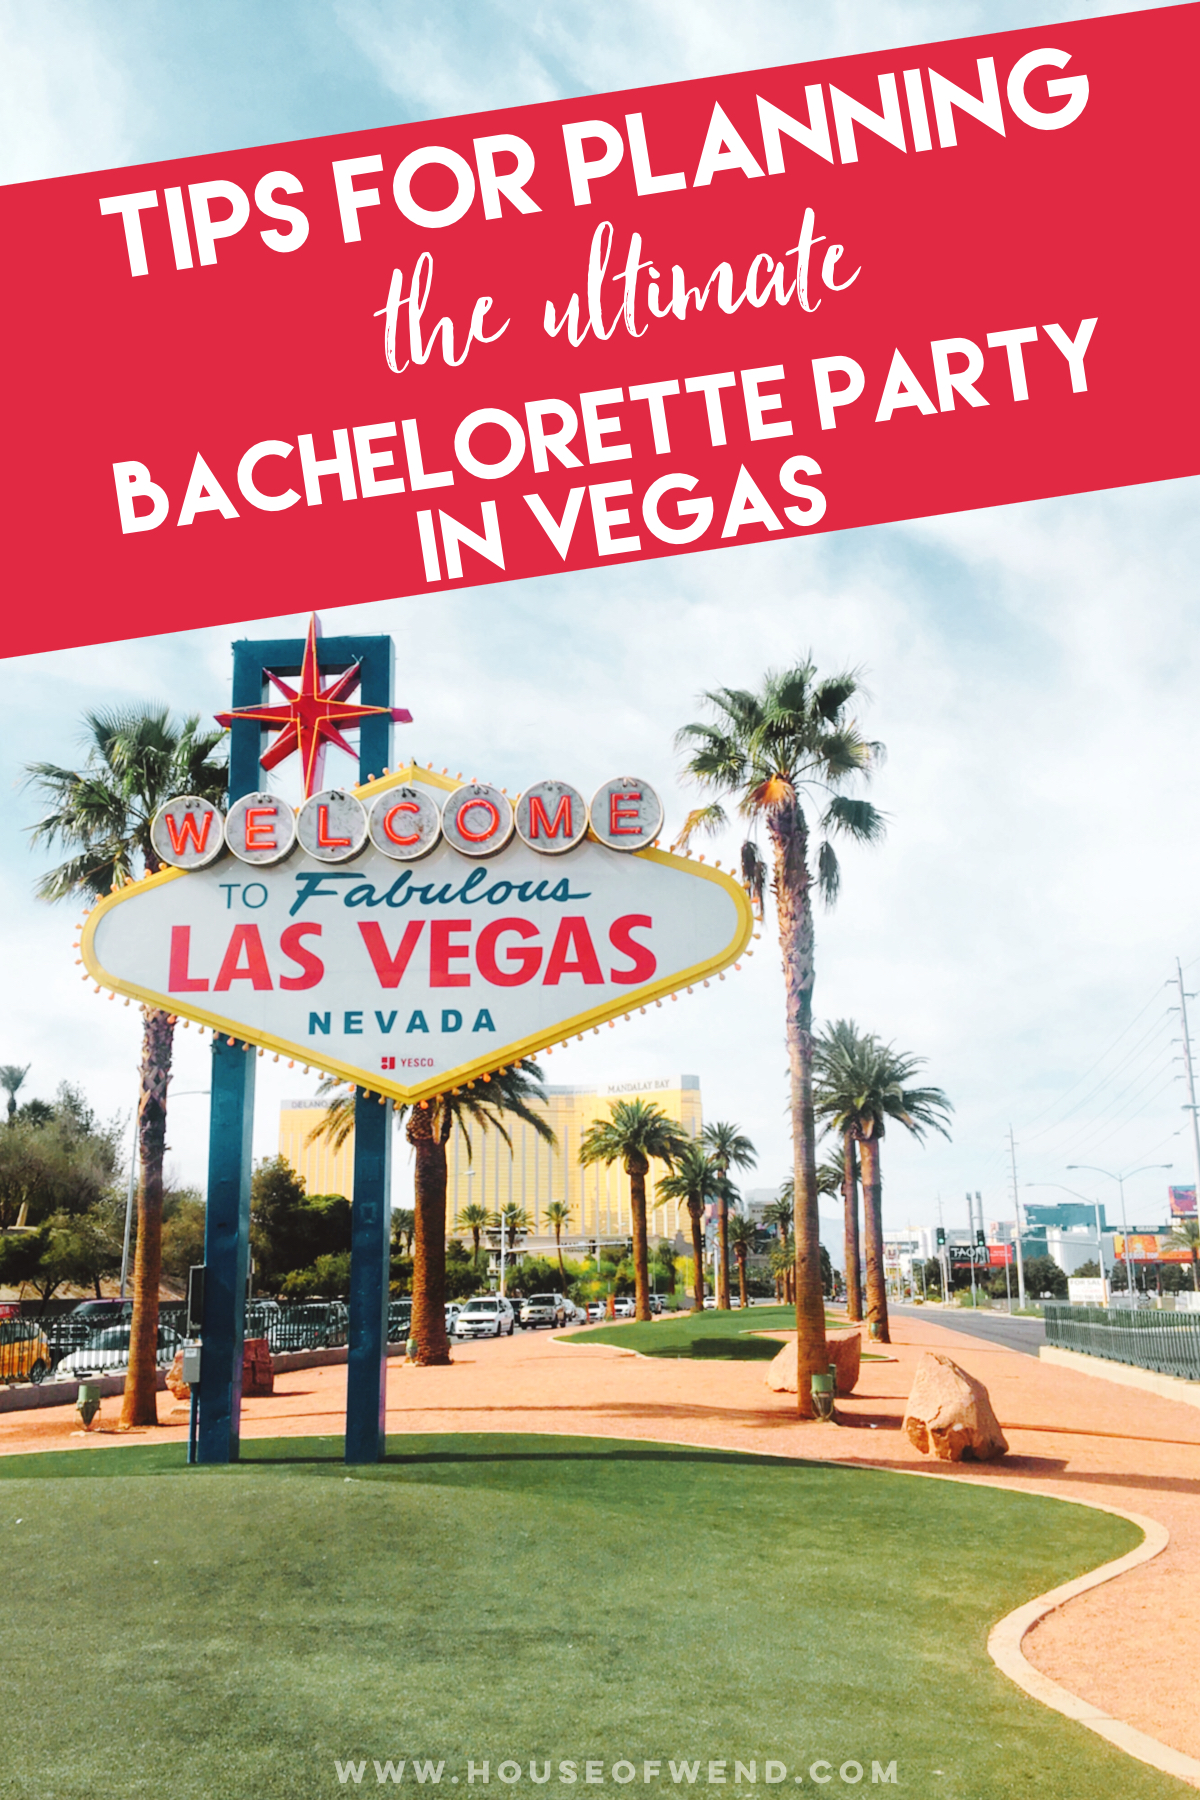 Tips for planning the ultimate bachelorette party in Las Vegas